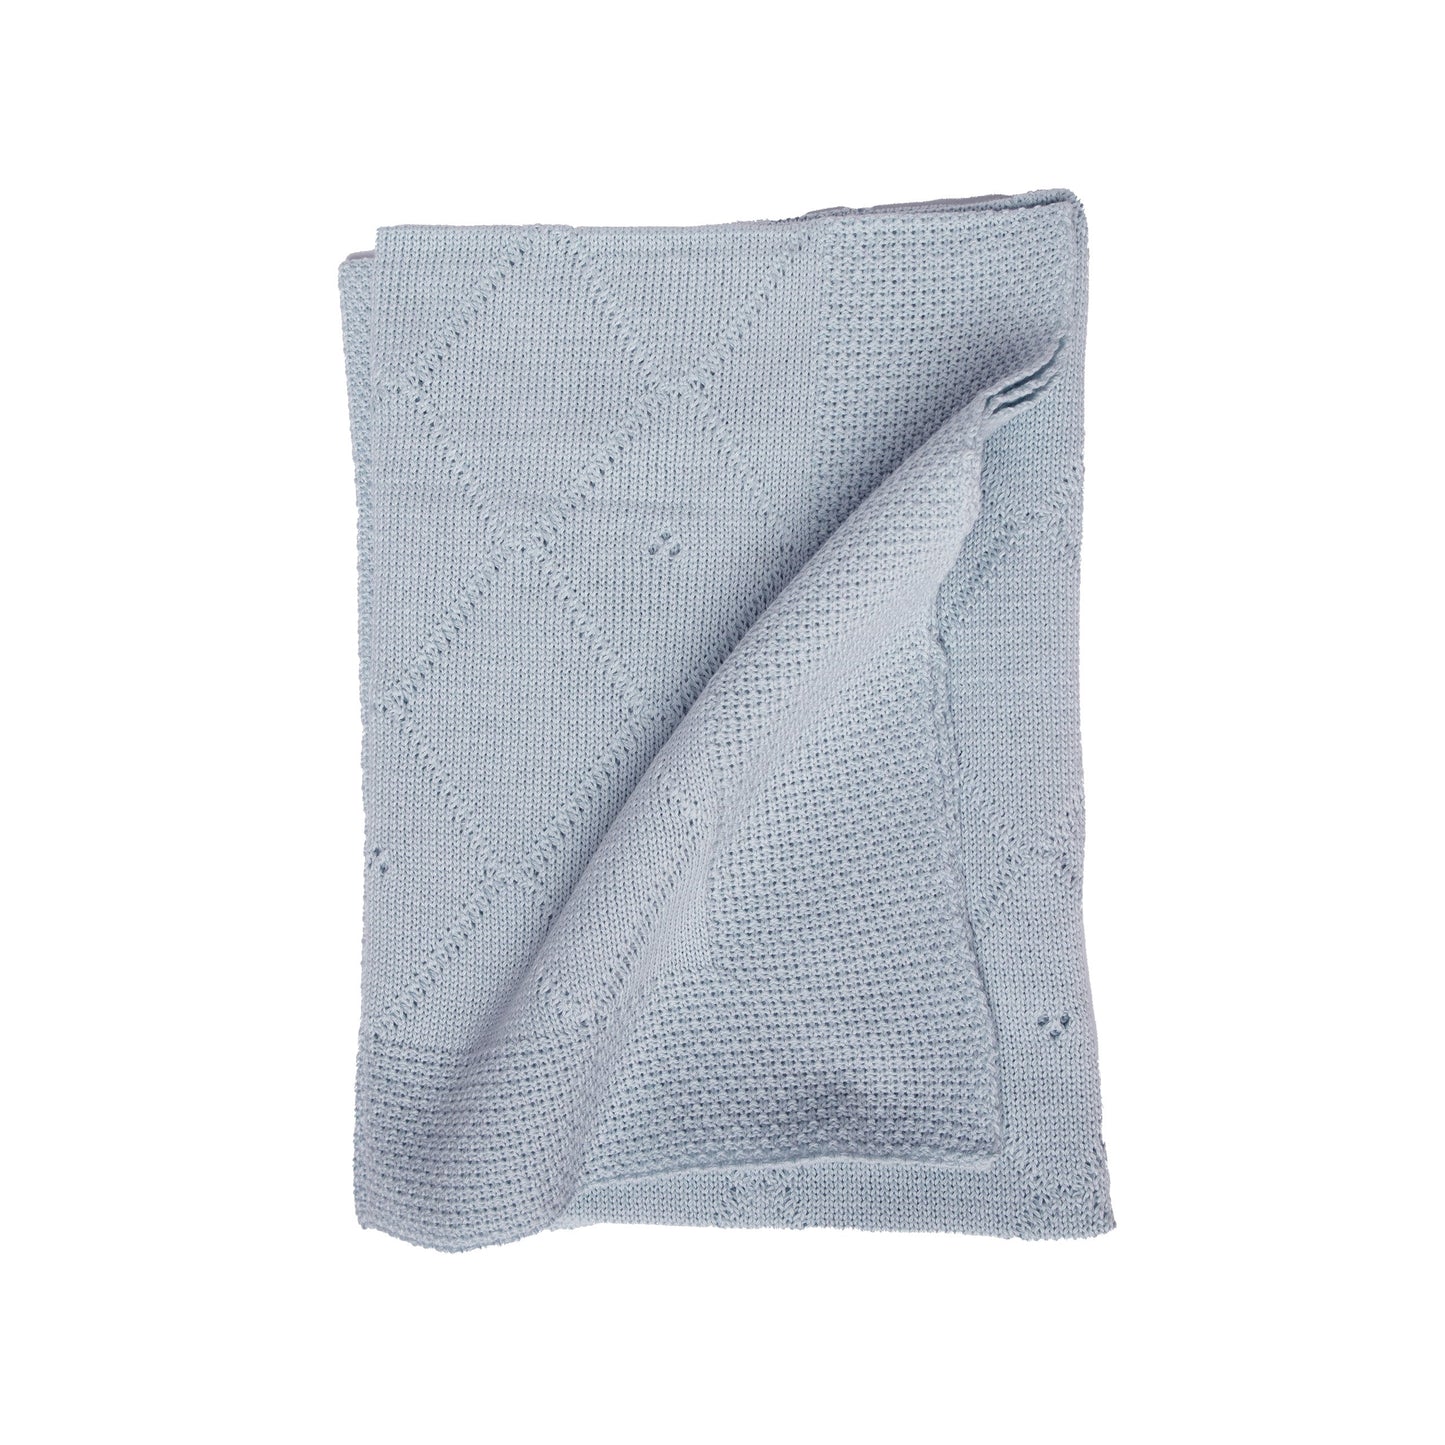 Classic Knit Receiving Blanket, Blue